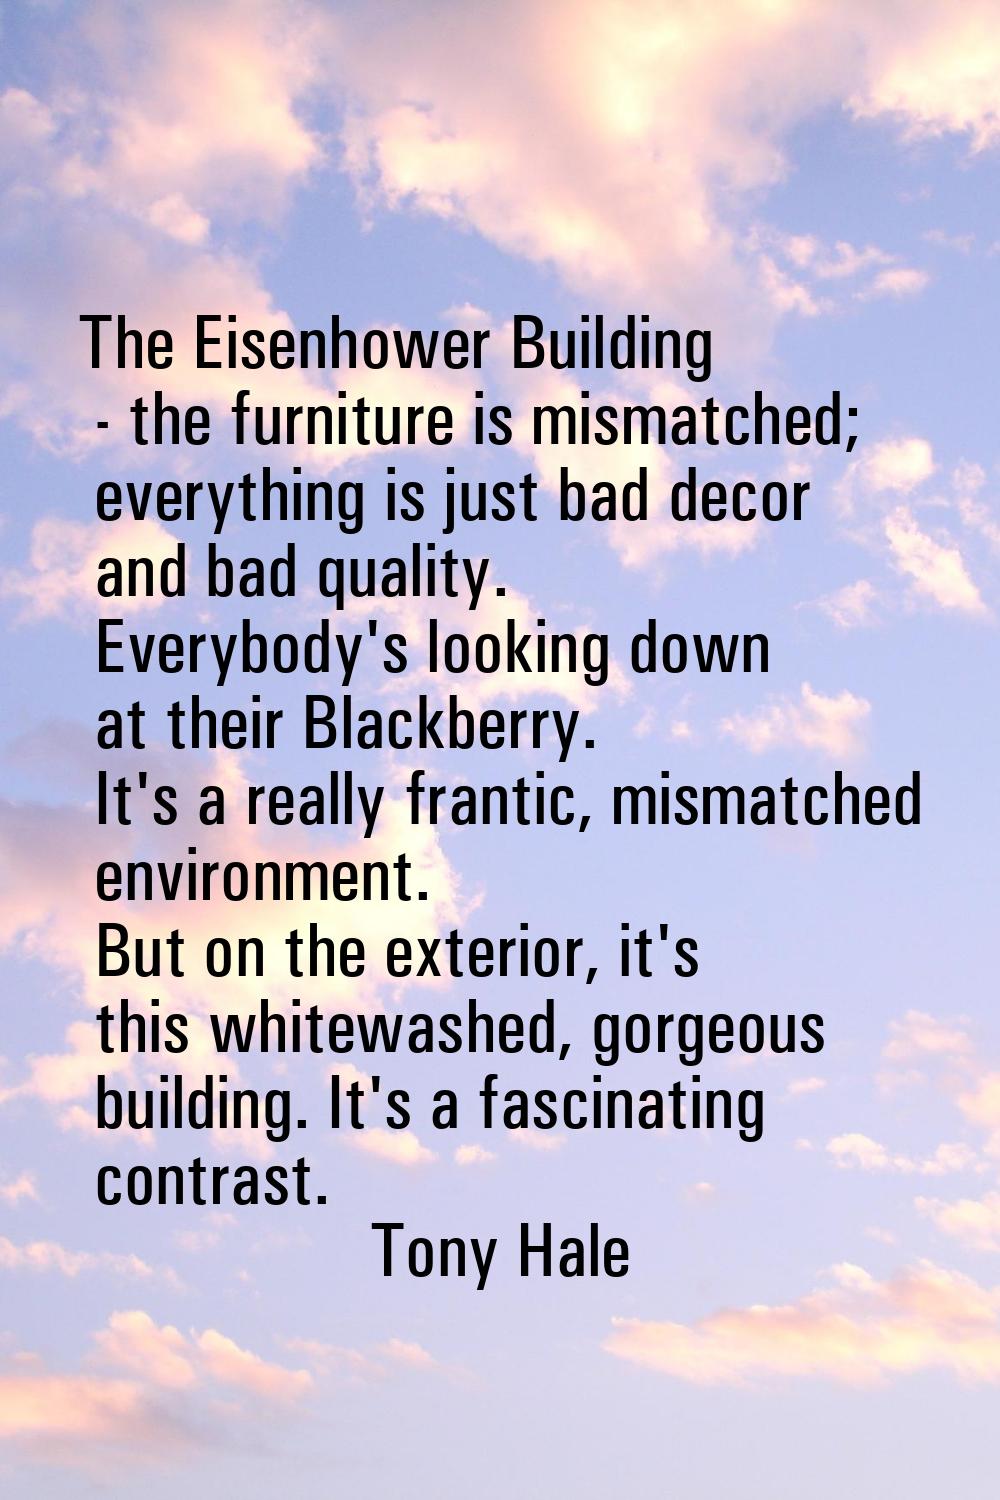 The Eisenhower Building - the furniture is mismatched; everything is just bad decor and bad quality